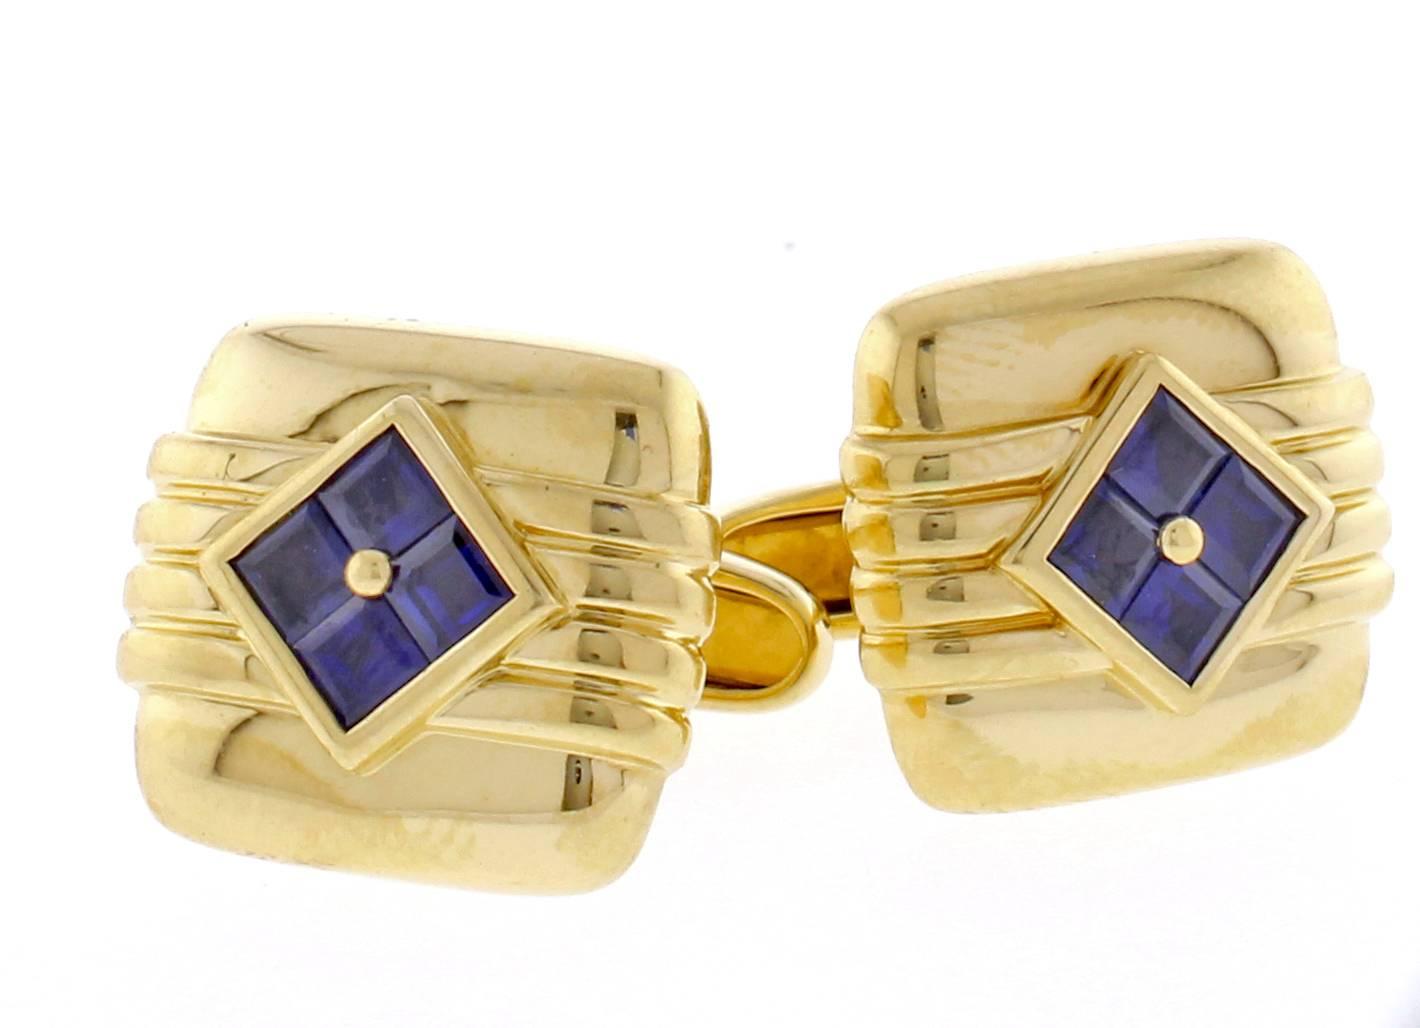 From Van Cleef & Arpels,   a distinctive pair of sapphire and gold cufflinks. The cufflinks measure 18.5mm by 16mm. Original box